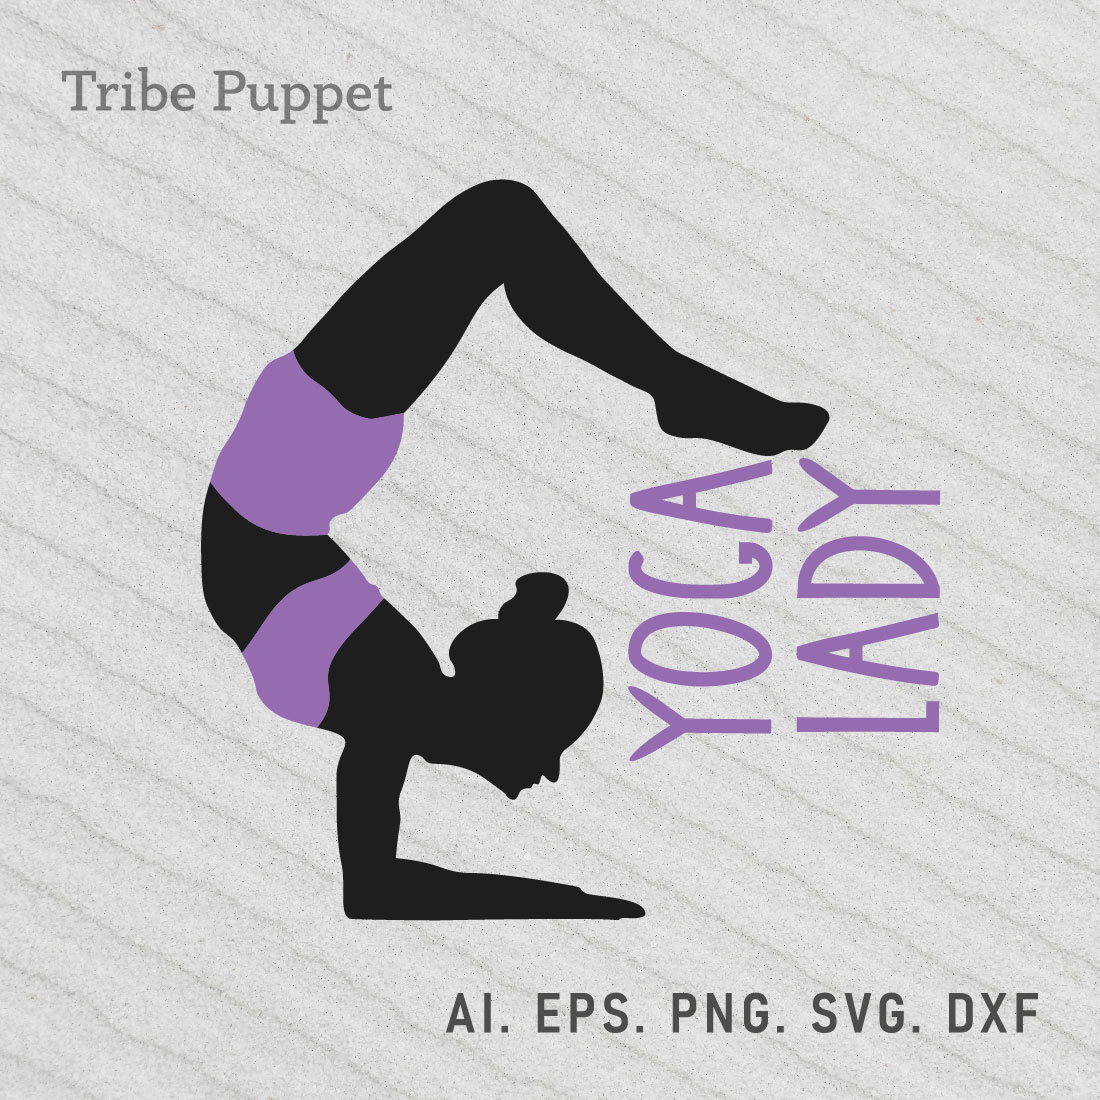 Yoga SVG preview image.